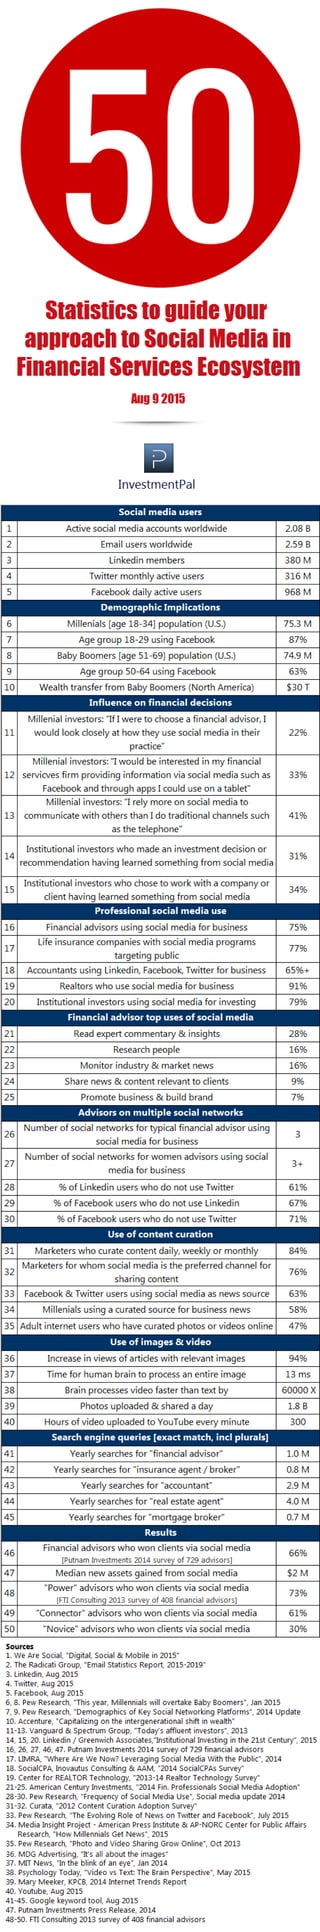 50 statistics to guide your approach to social media marketing in financial services ecosystem